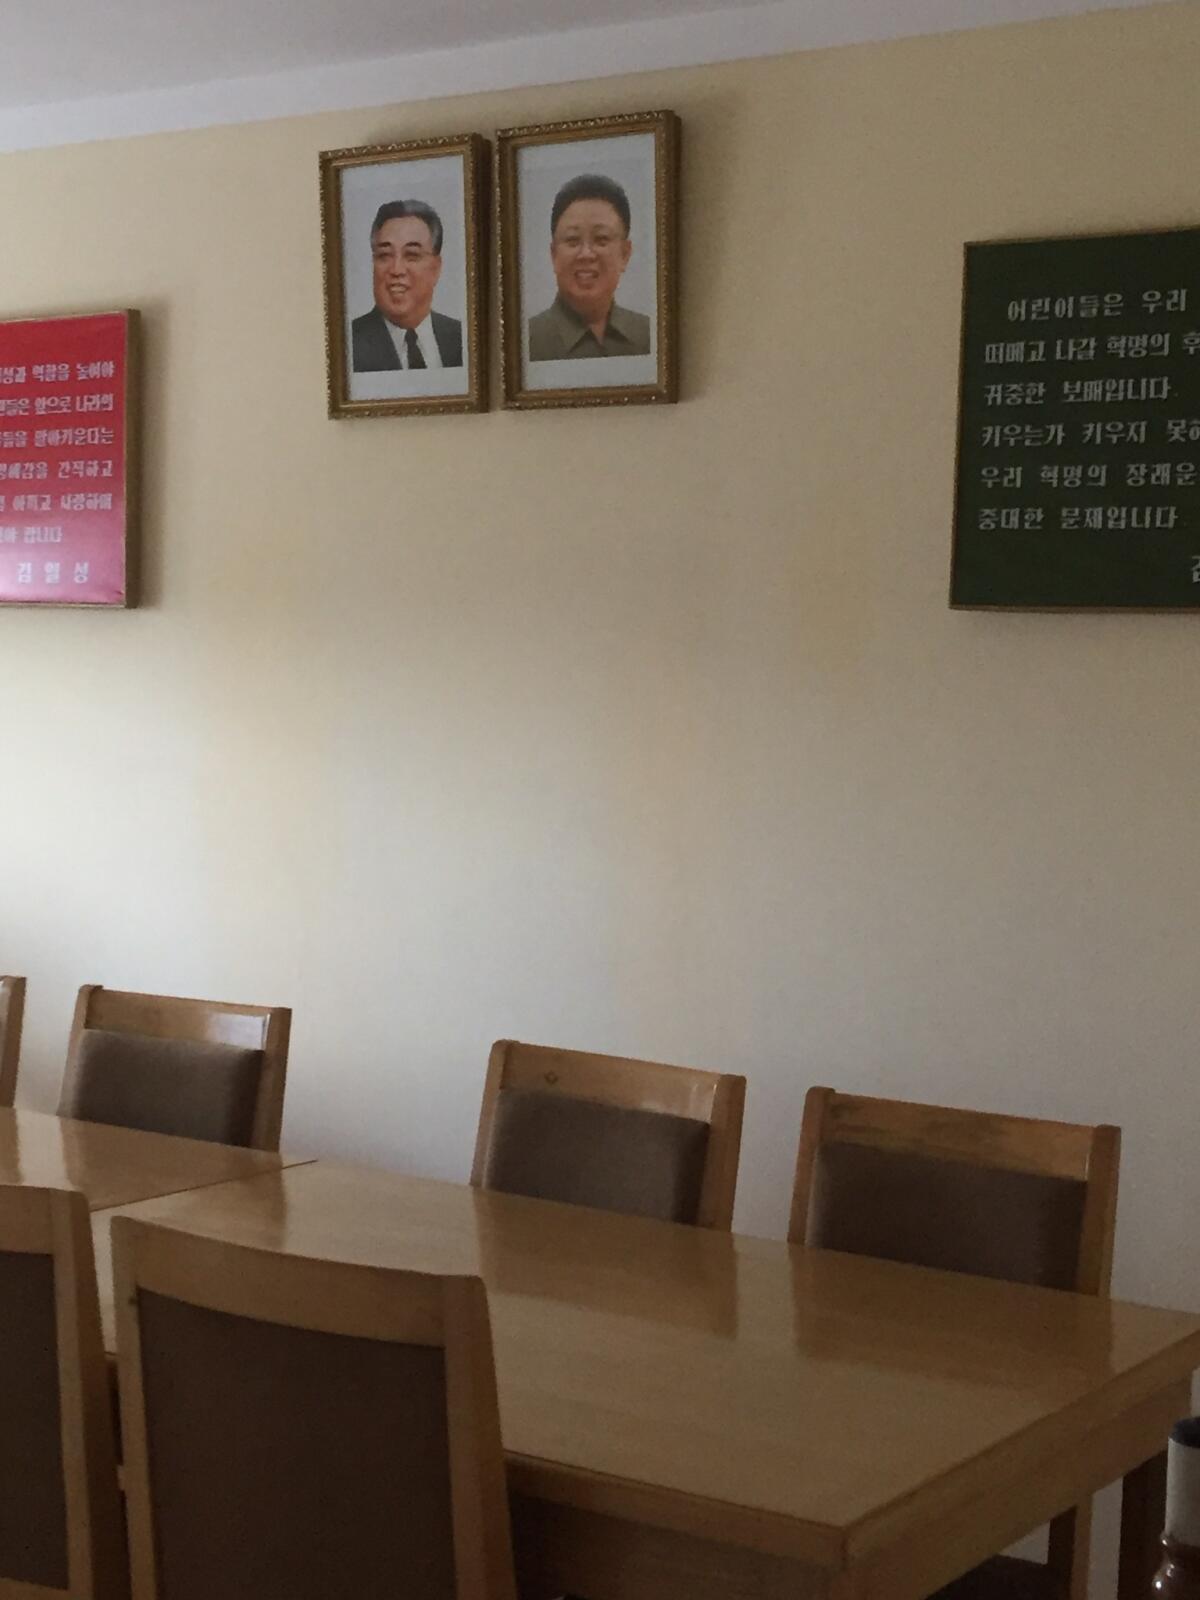 Portraits of Kim Il Sung and Kim Jong Il hang on the wall at the Changchon nursery school. (Julie Makinen / Los Angeles Times)